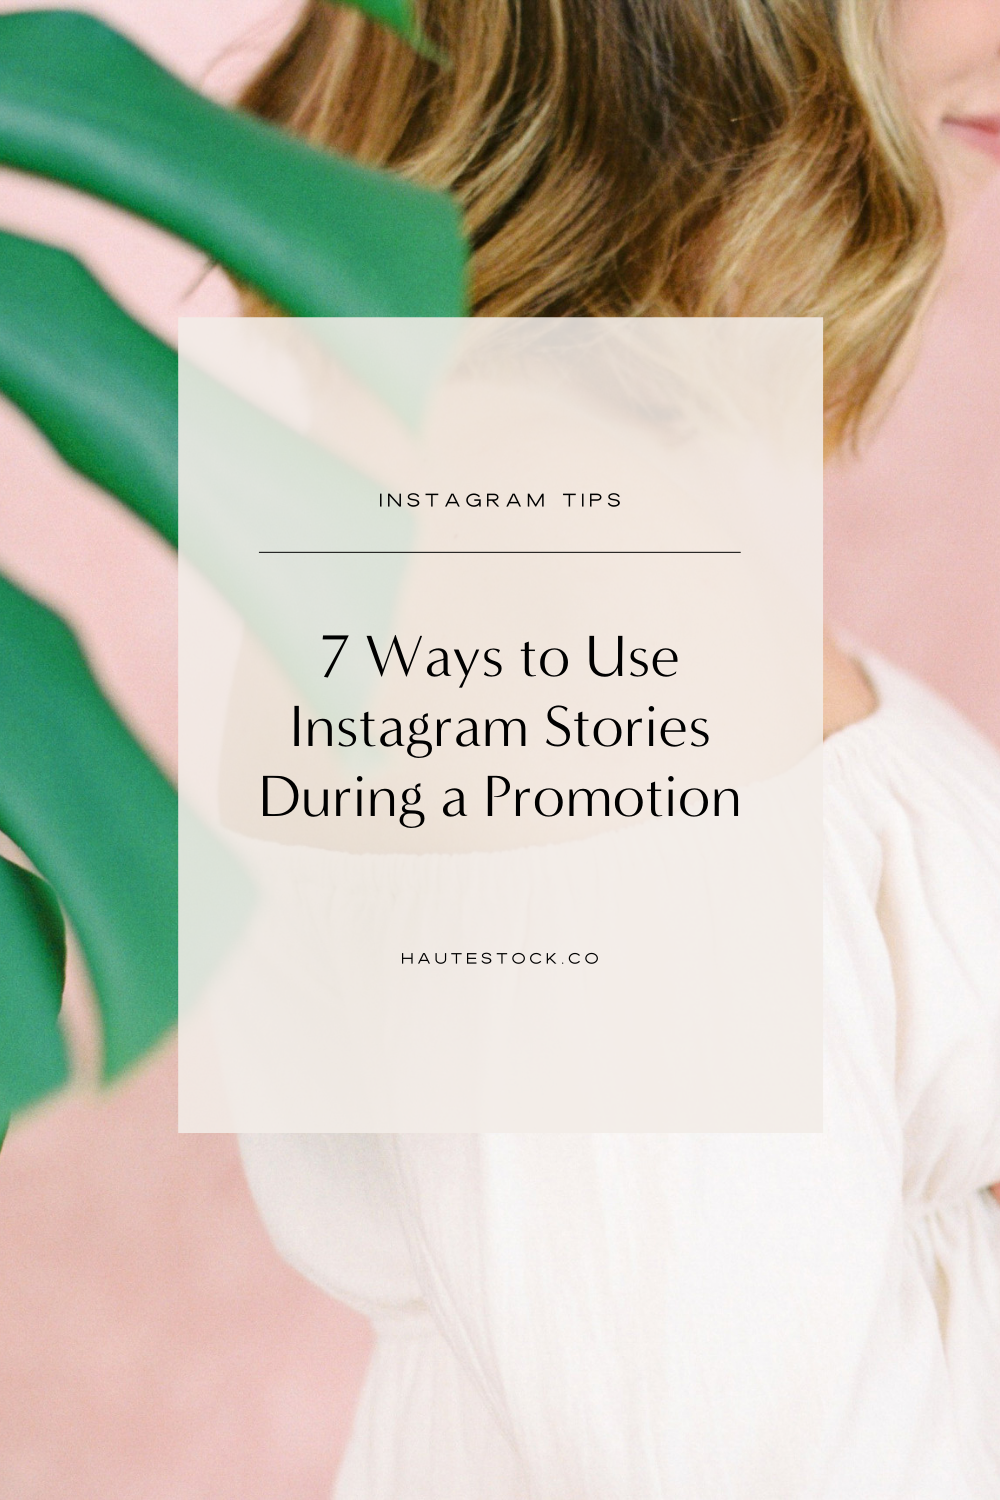 7 Ways to Use Instagram Stories During a Promotion.